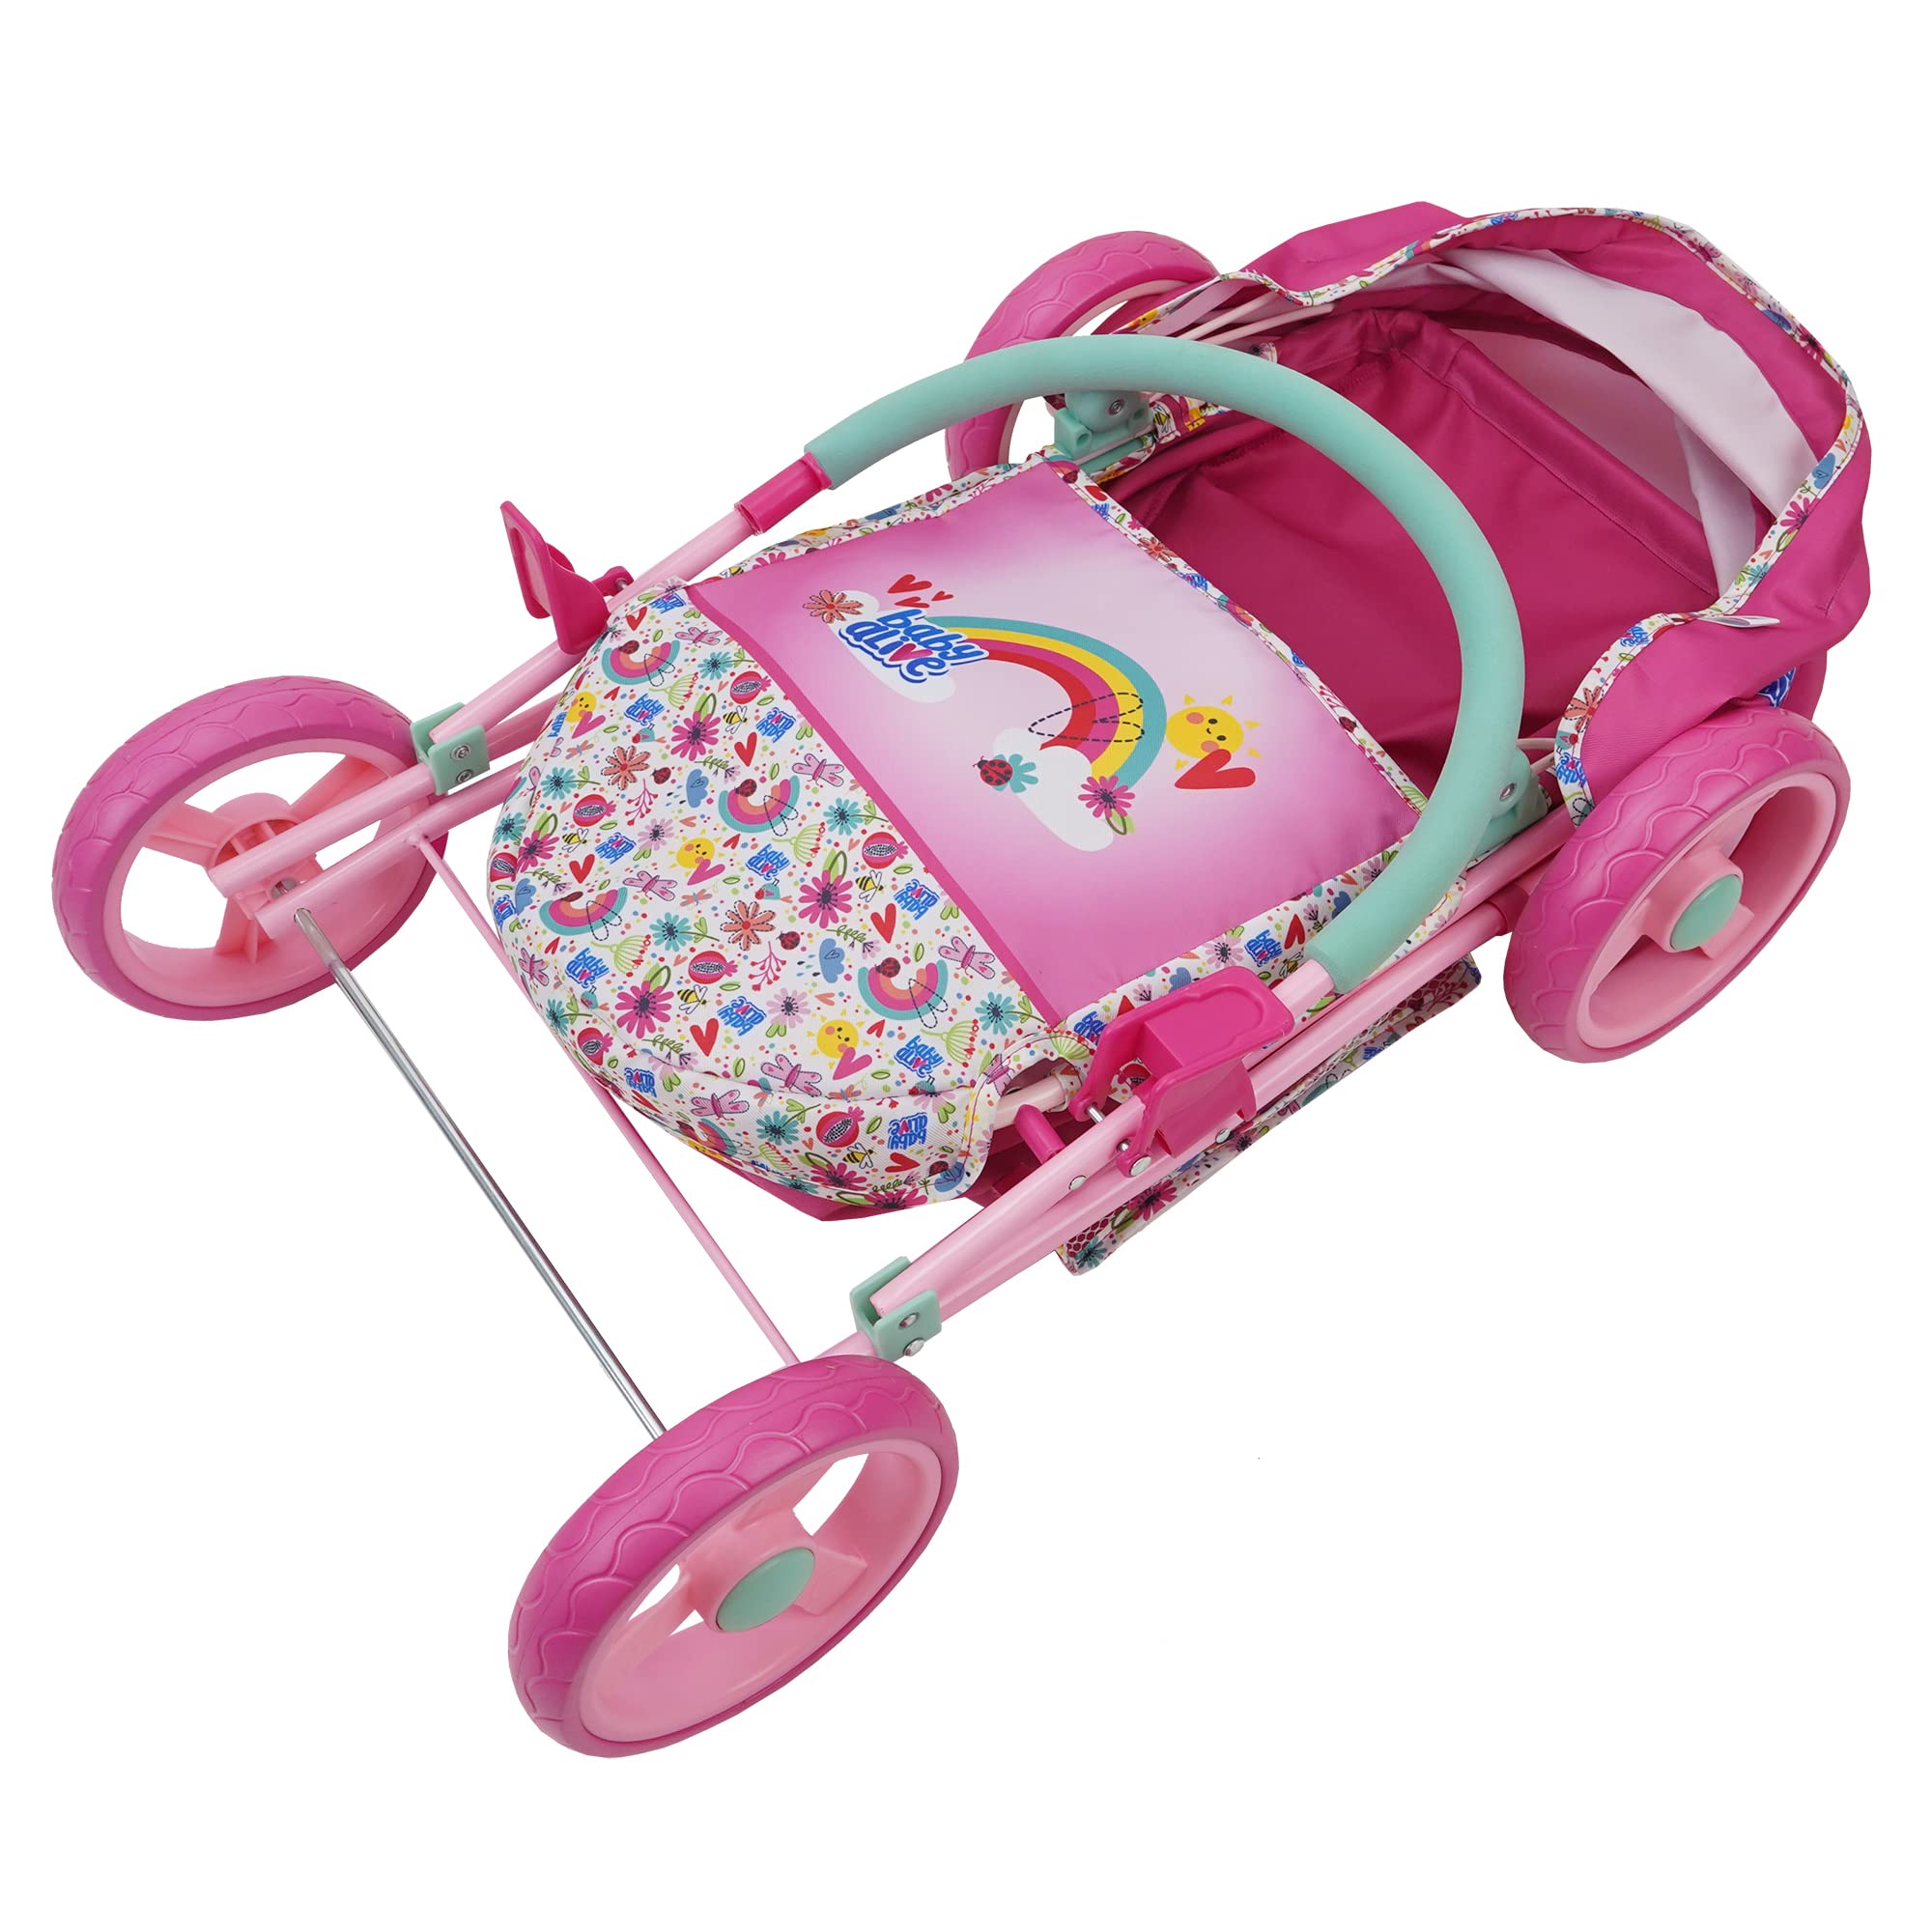 Baby Alive: Deluxe Classic Doll Pram - Pink & Rainbow - Includes Matching Handbag/Diaper Bag, Fits Dolls up to 18